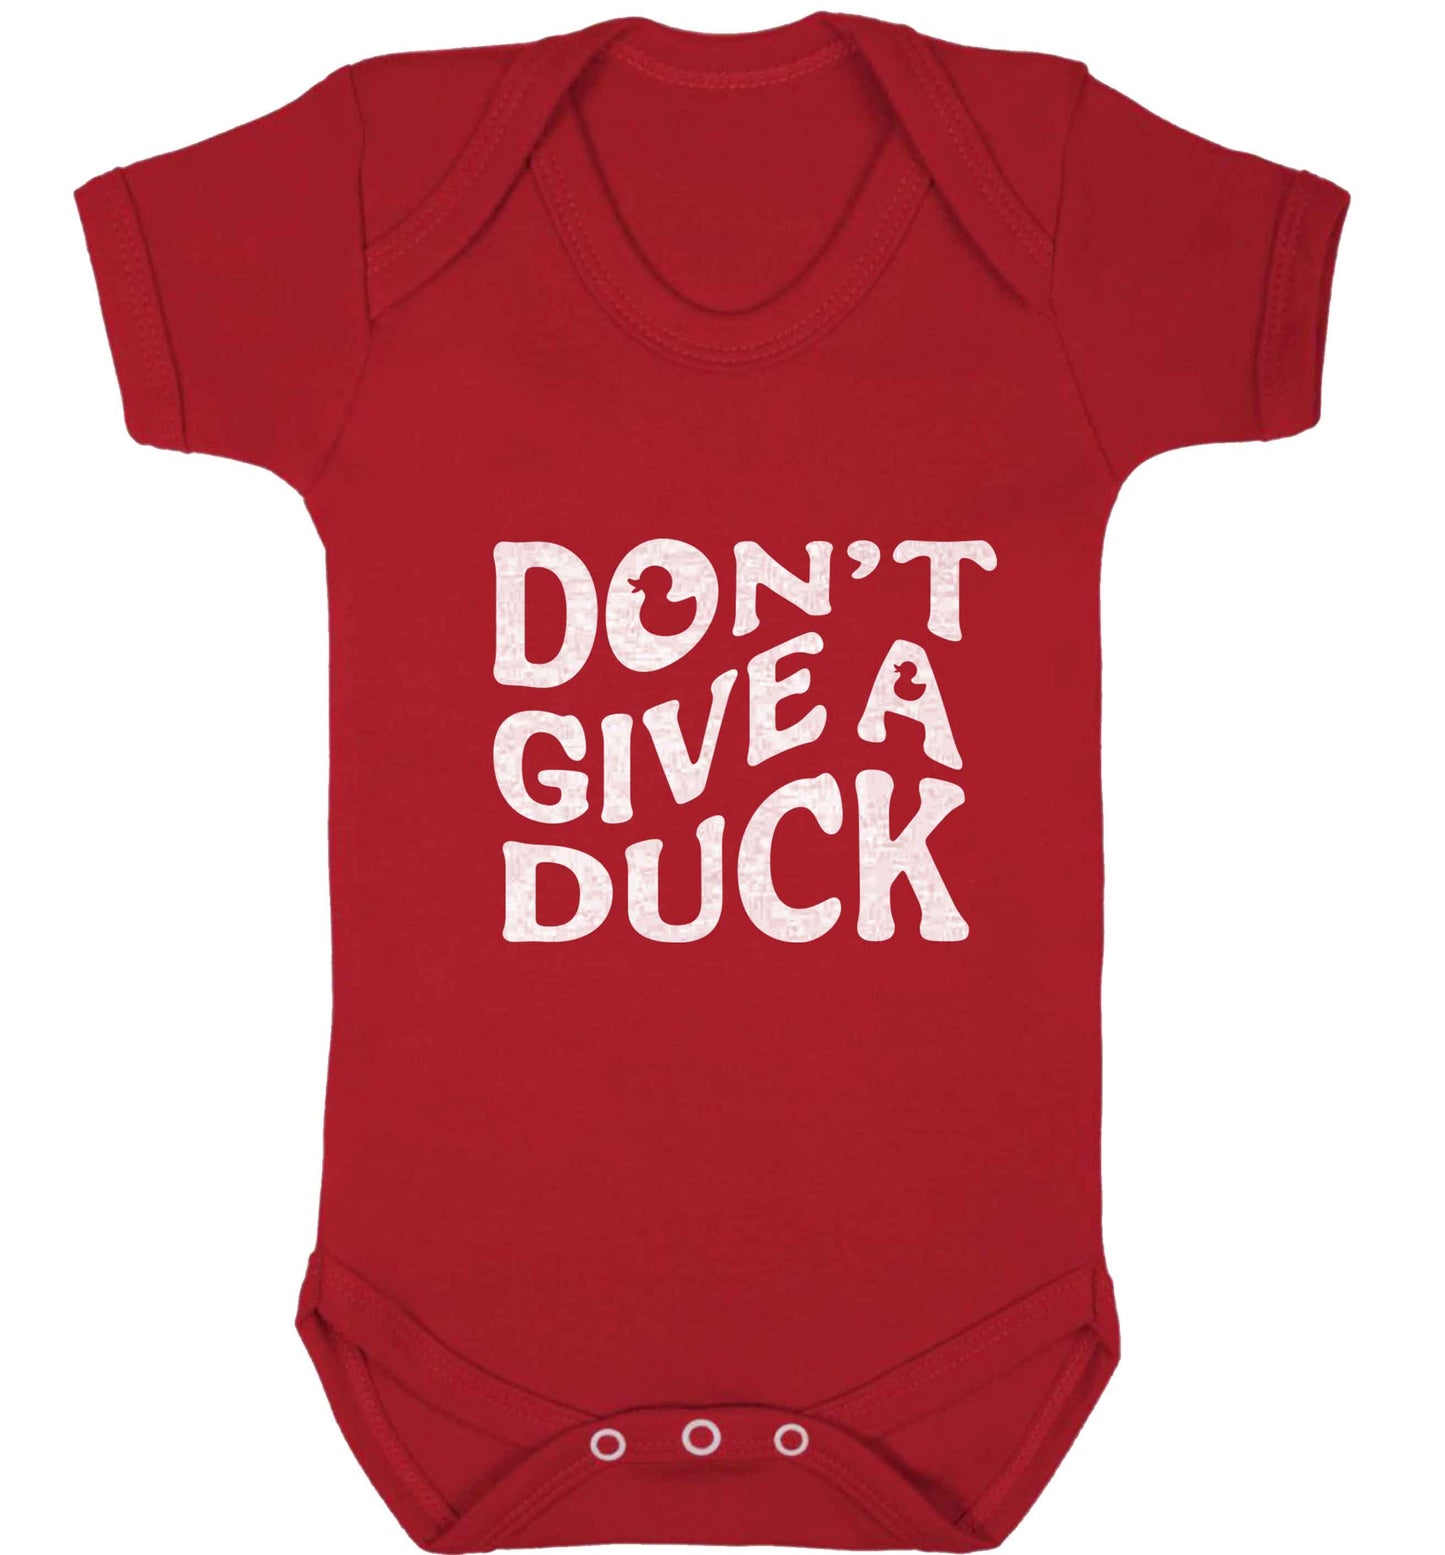 Don't give a duck baby vest red 18-24 months